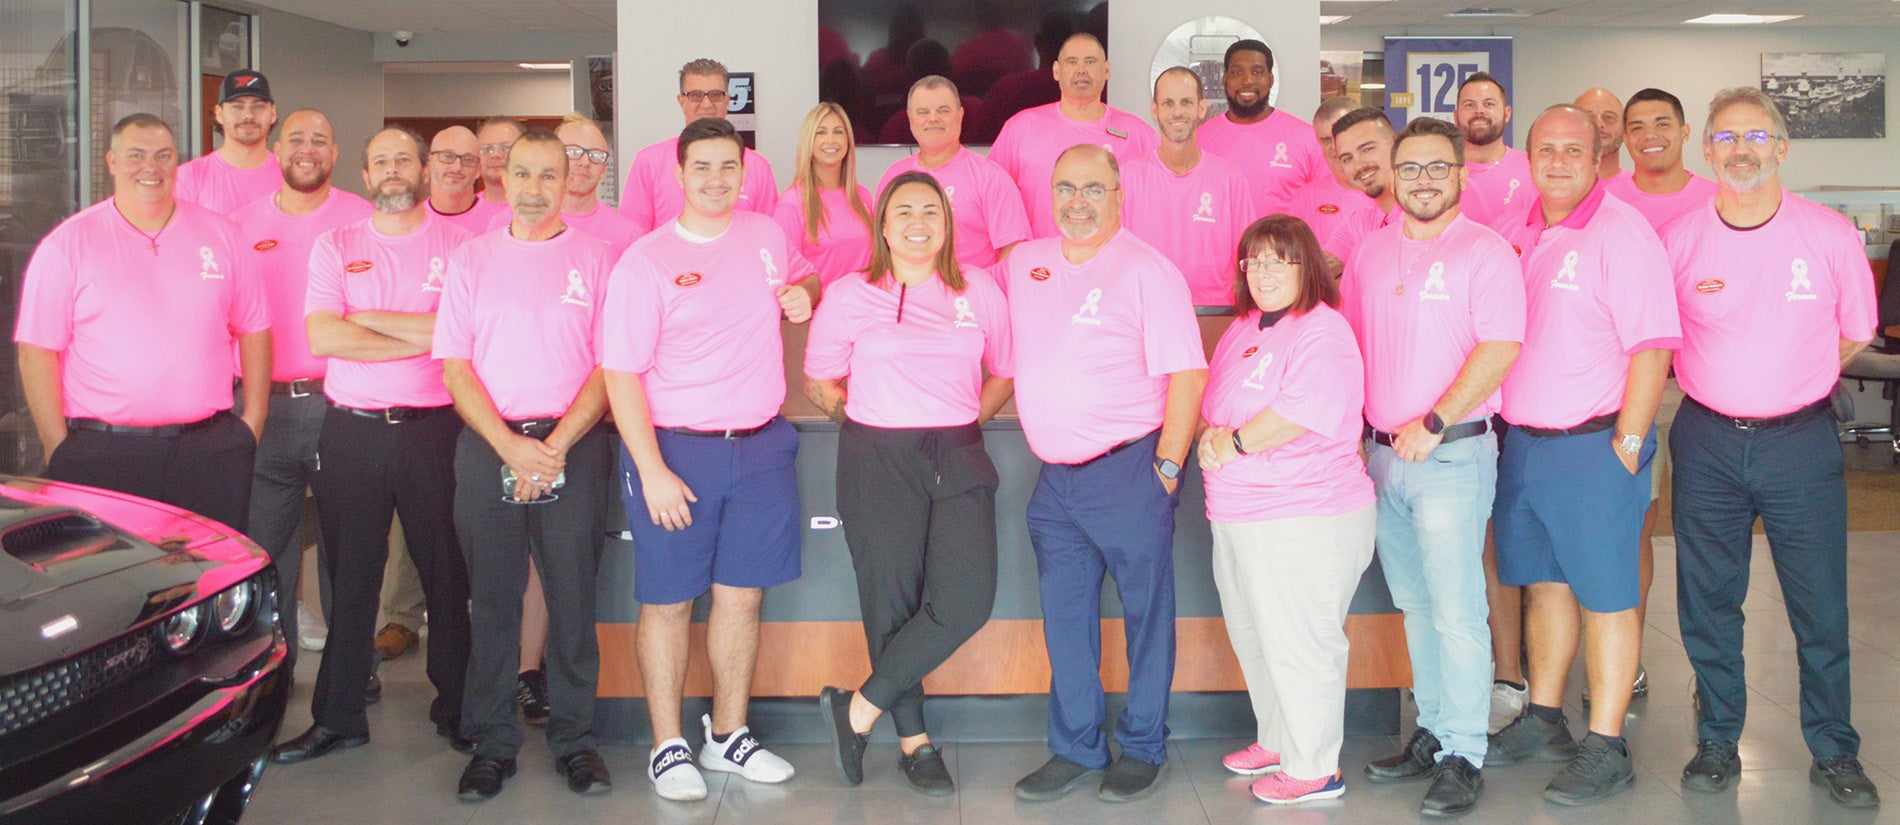 Ferman of New Port Richey Dealership Employee Photo all wearing Breast Cancer Awareness Pink Shirts